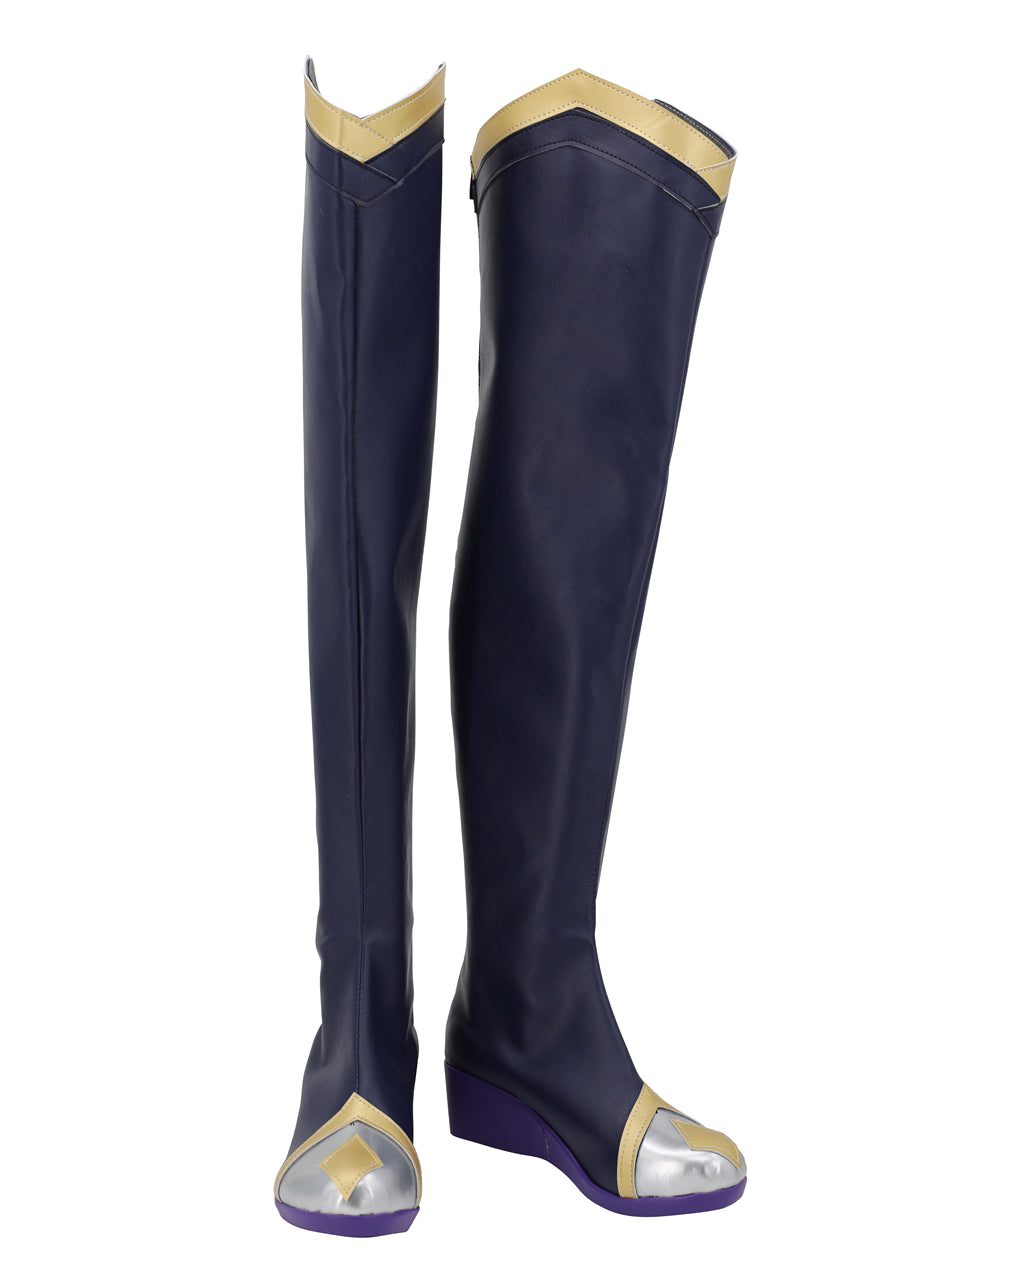 SBluuCosplay LOL DRX Ashe, chaussures de Cosplay, bottes